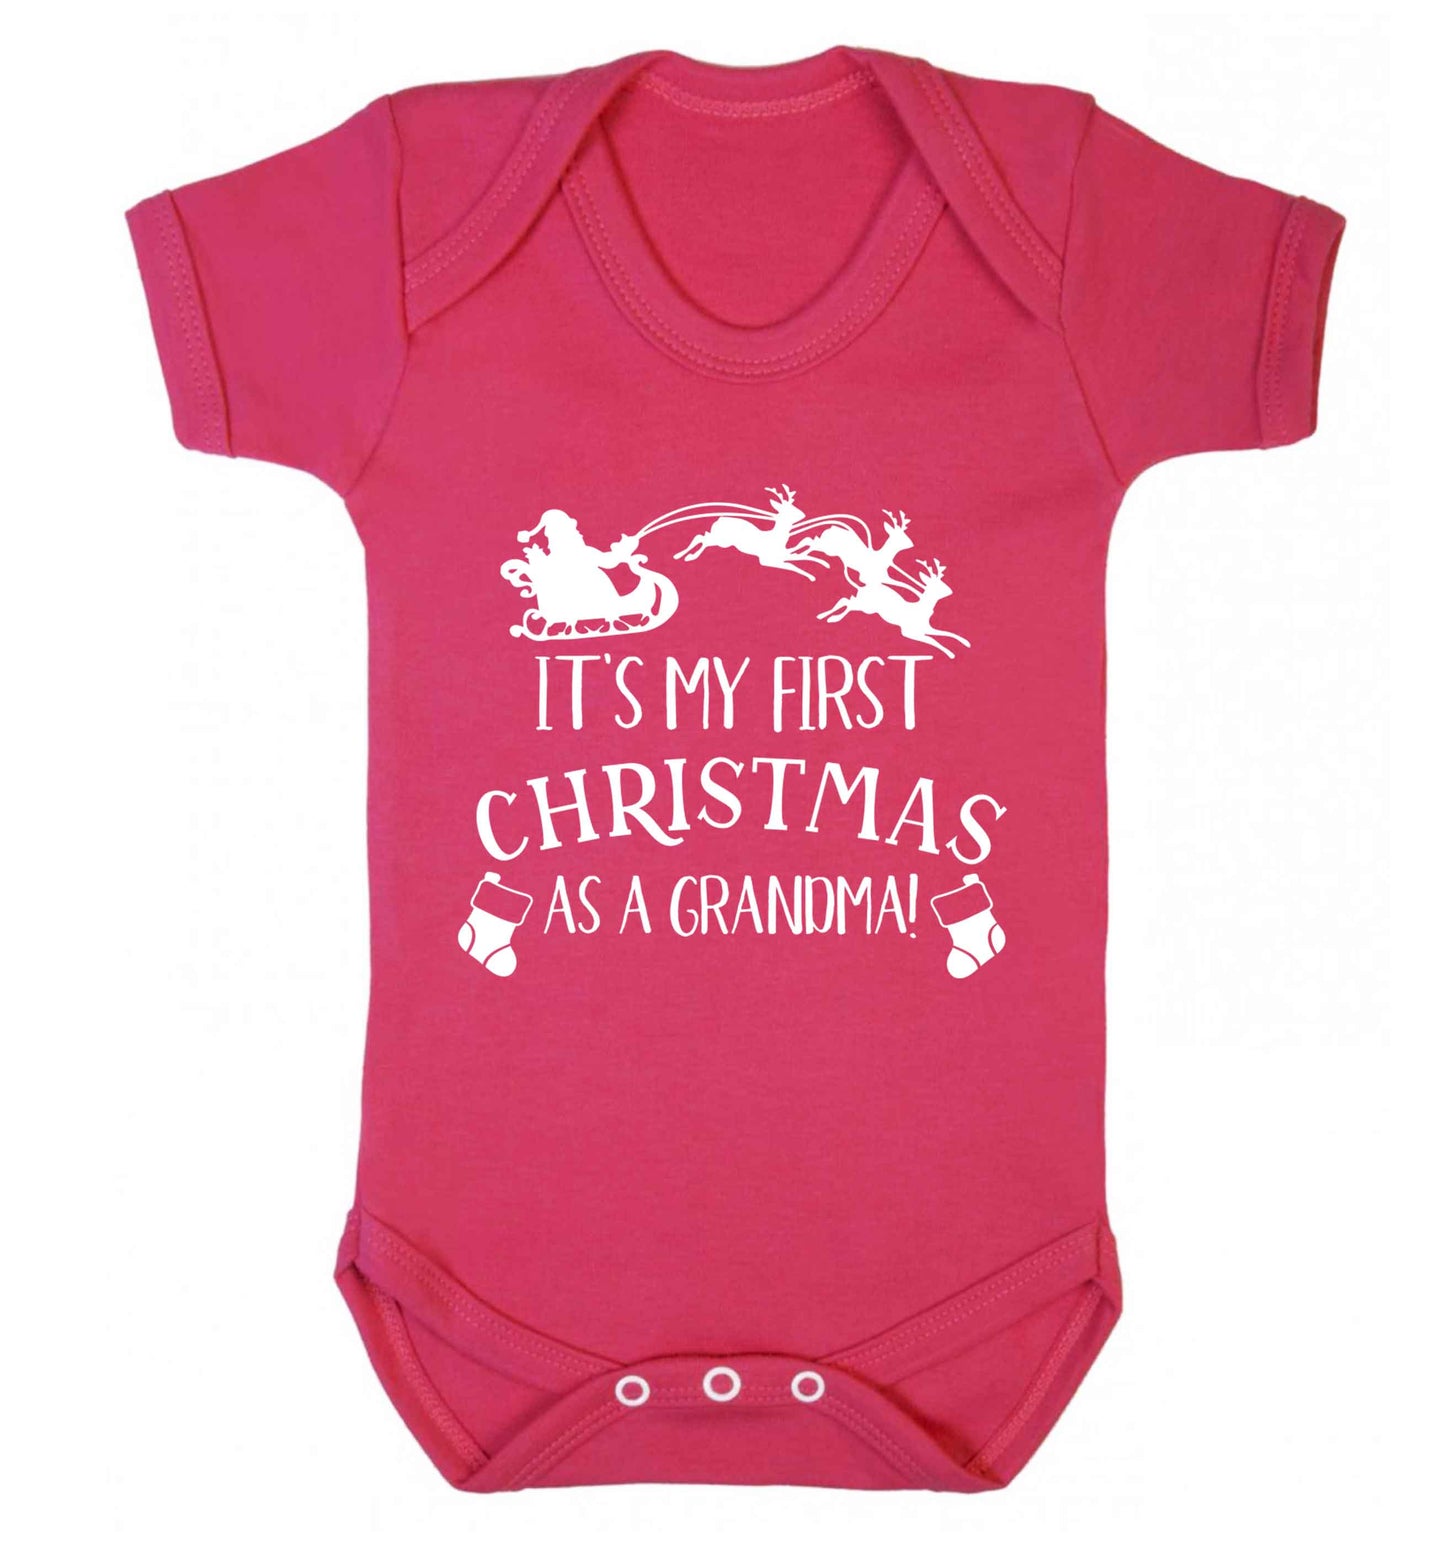 It's my first Christmas as a grandma! Baby Vest dark pink 18-24 months